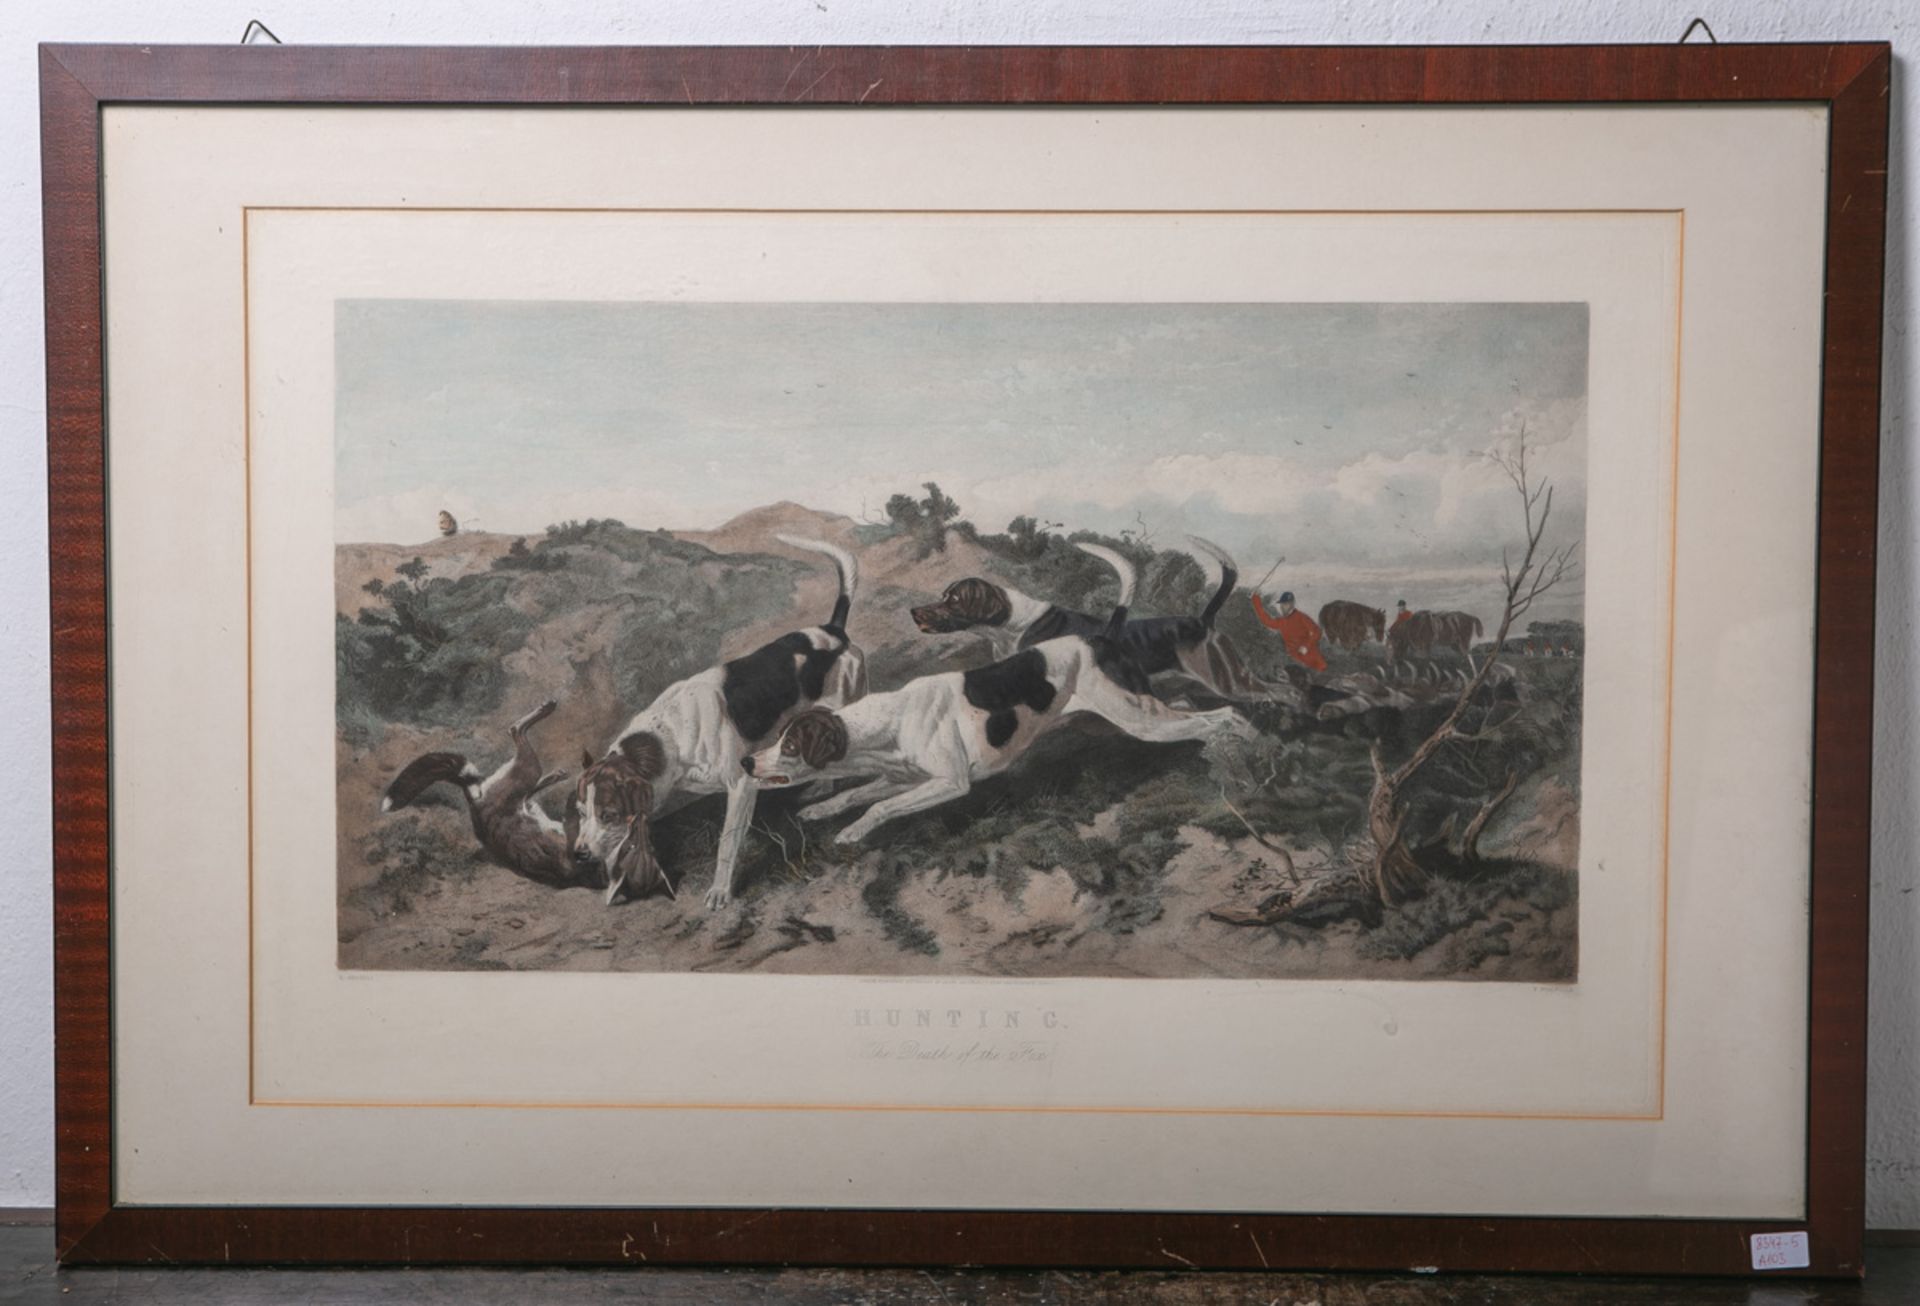 Stracpoole, Frederick (1813 - 1907), "Hunting / The death of the fox"